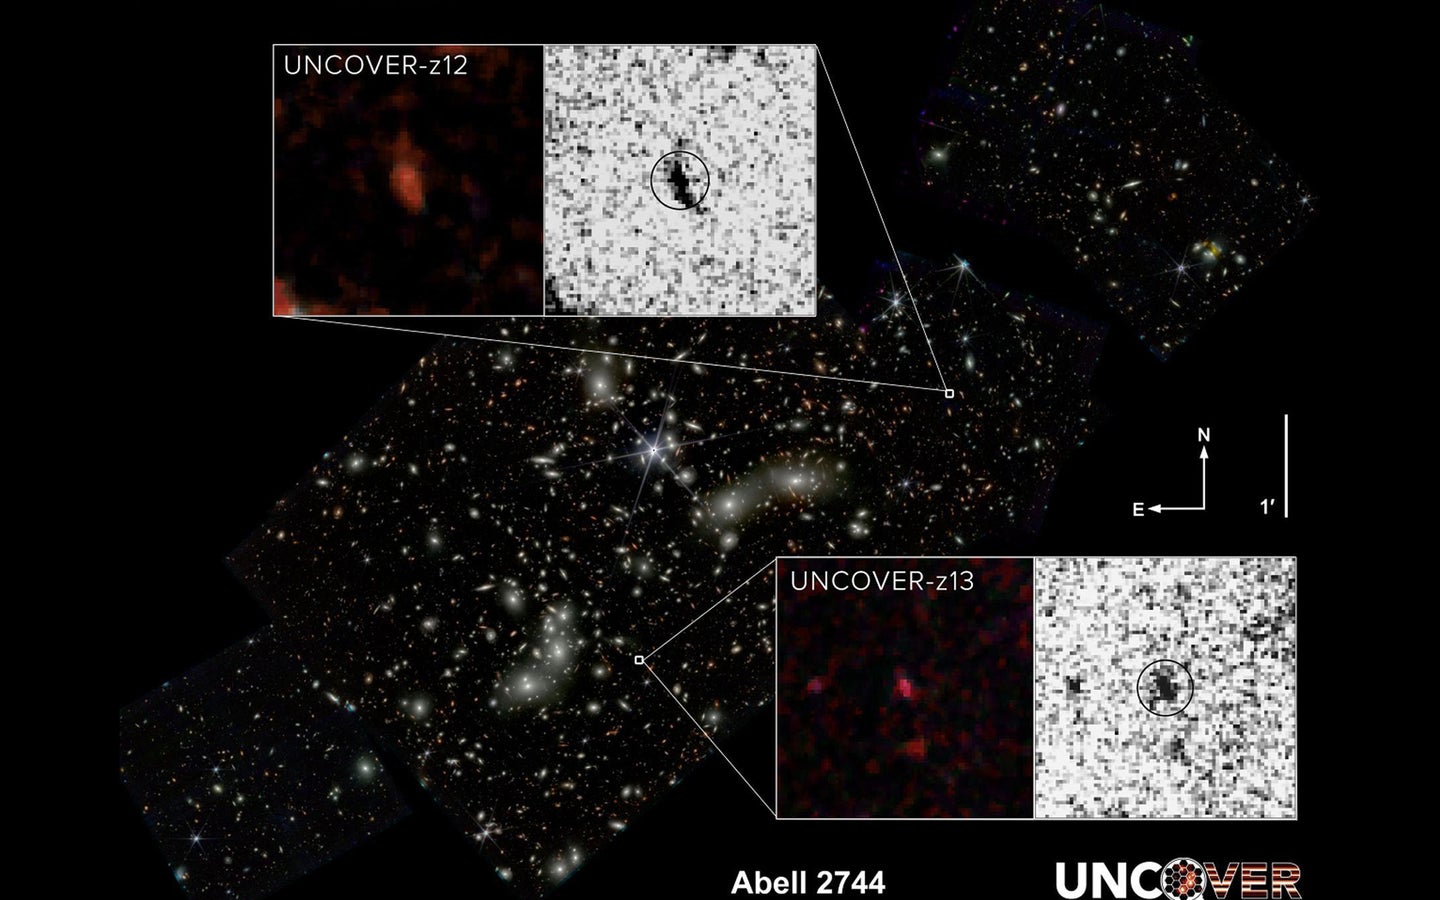 UNCOVER z-13 and UNCOVER z-12 are the second and fourth most distant galaxy ever observed. The James Webb Space Telescope’s Near-Infrared Camera (NIRCam) helped confirm their existence within Pandora’s Cluster (Abell 2744). They are shown here as near-infrared wavelengths of light that have been translated to visible-light colors.